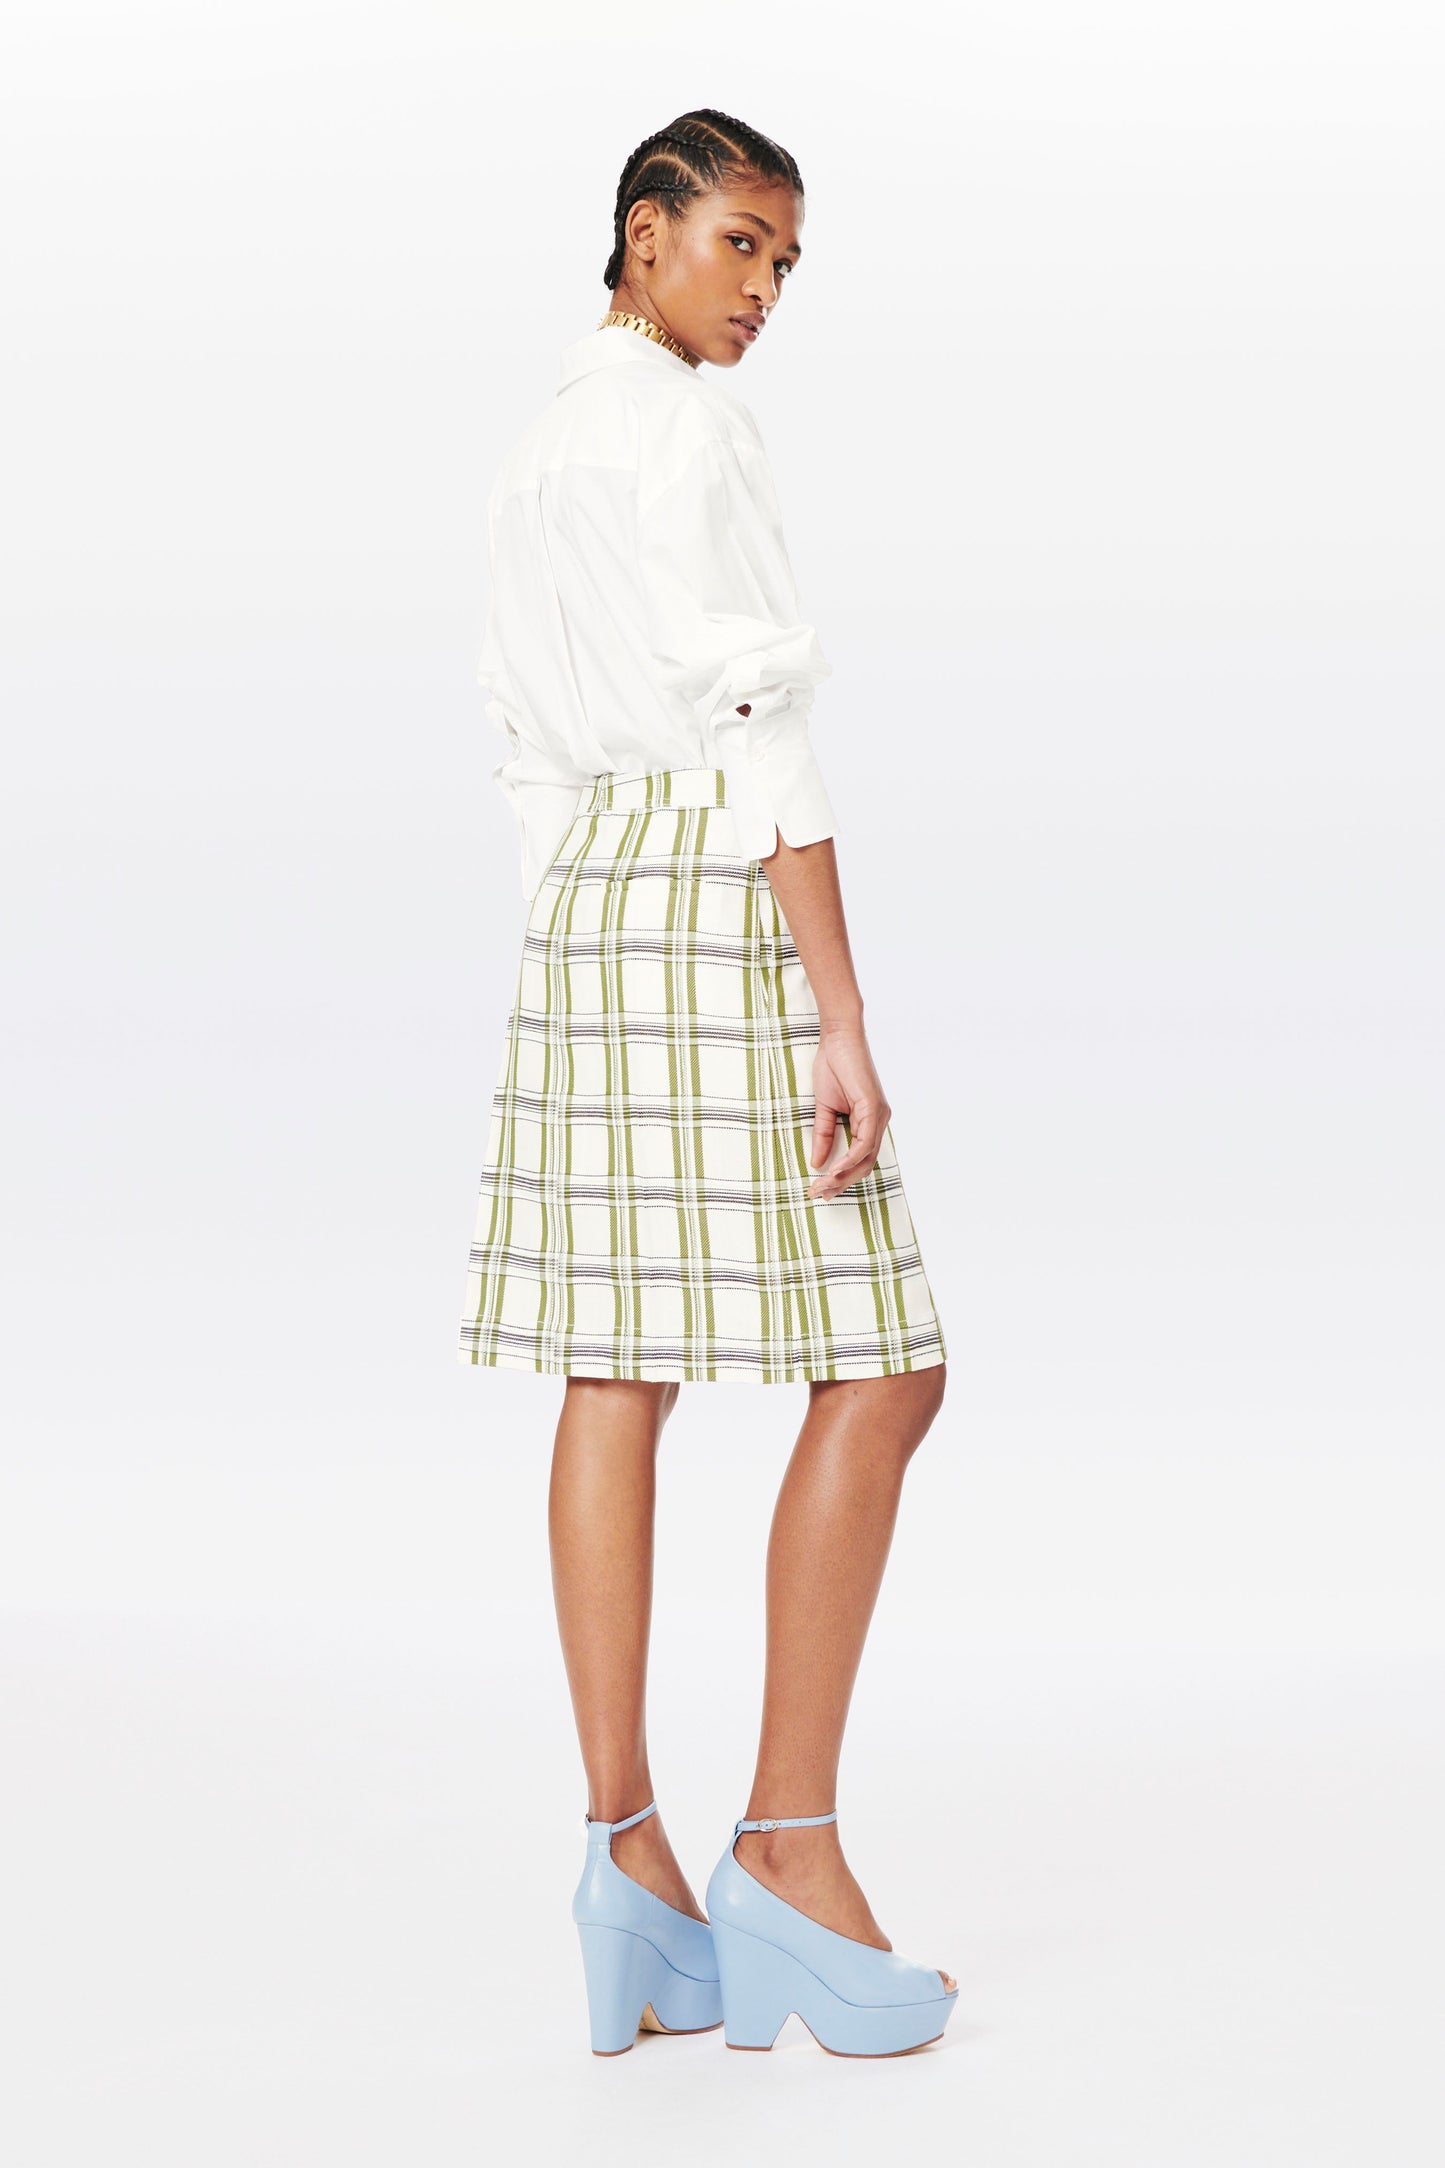 Wrap Skirt in Off White, Navy and Khaki Check